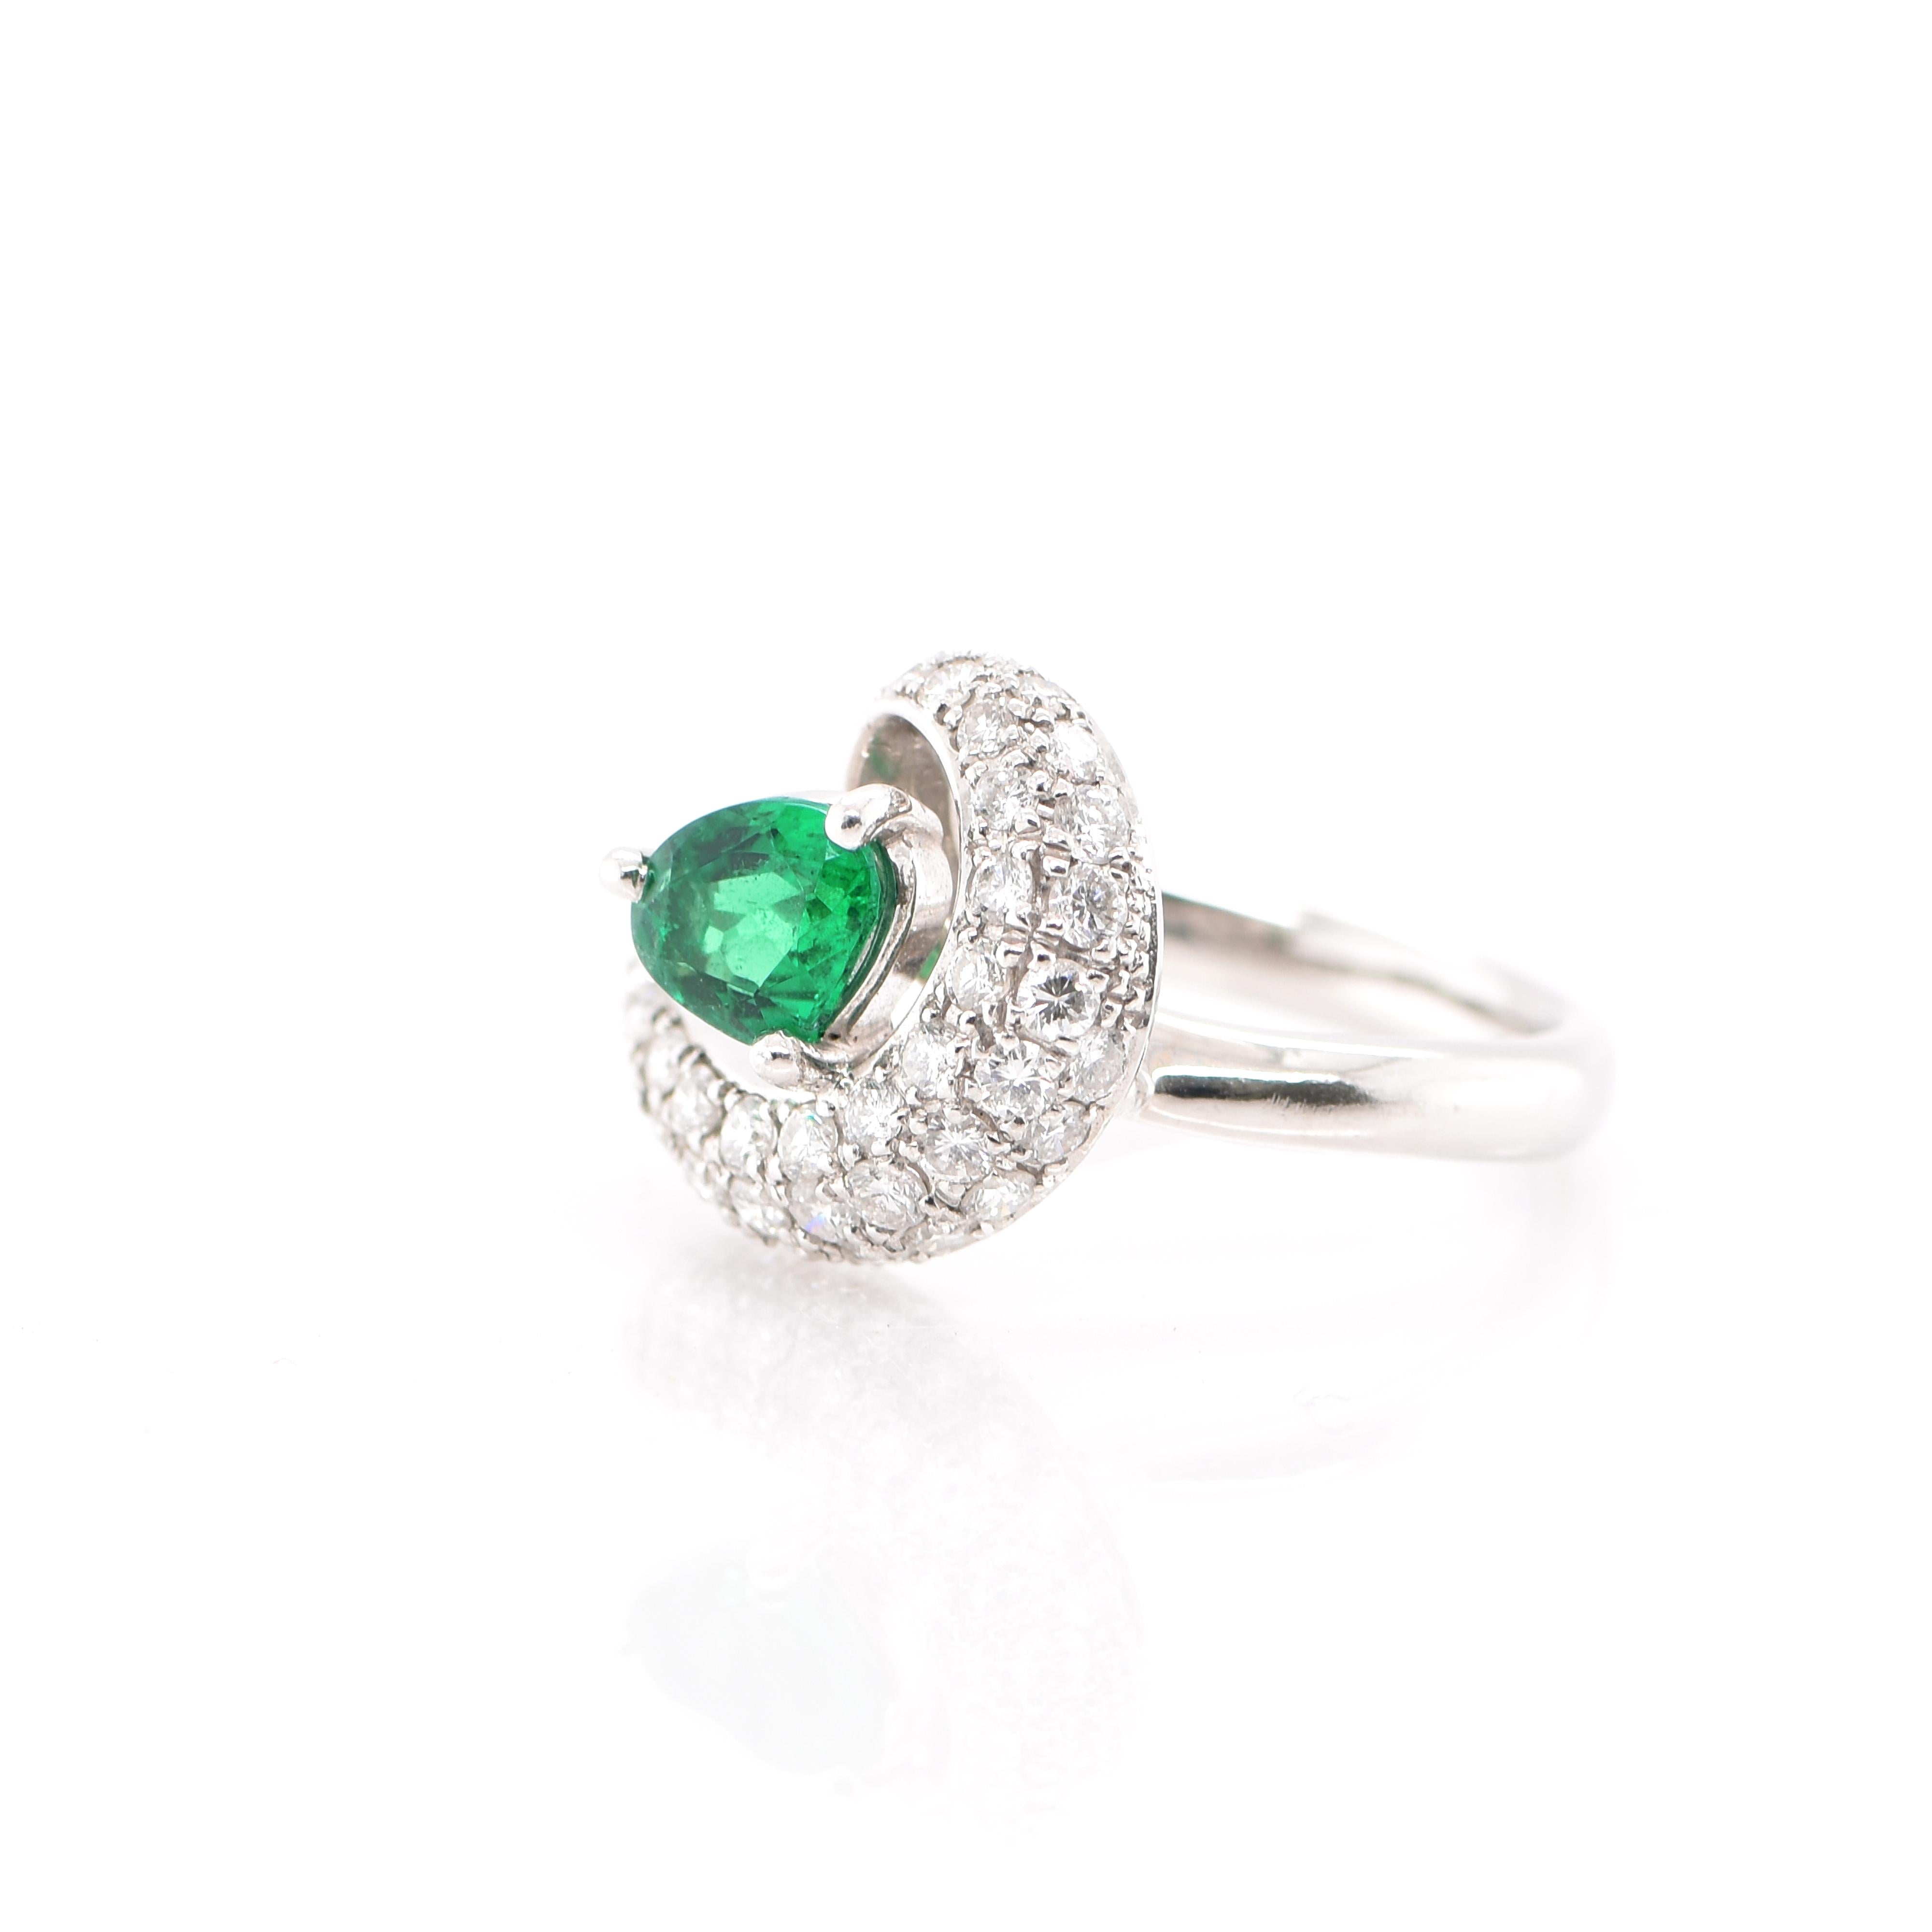 A stunning fashion ring featuring a 0.64 Carat Emerald and 0.80 Carats of Diamond Accents set in Platinum. People have admired emerald’s green for thousands of years. Emeralds have always been associated with the lushest landscapes and the richest